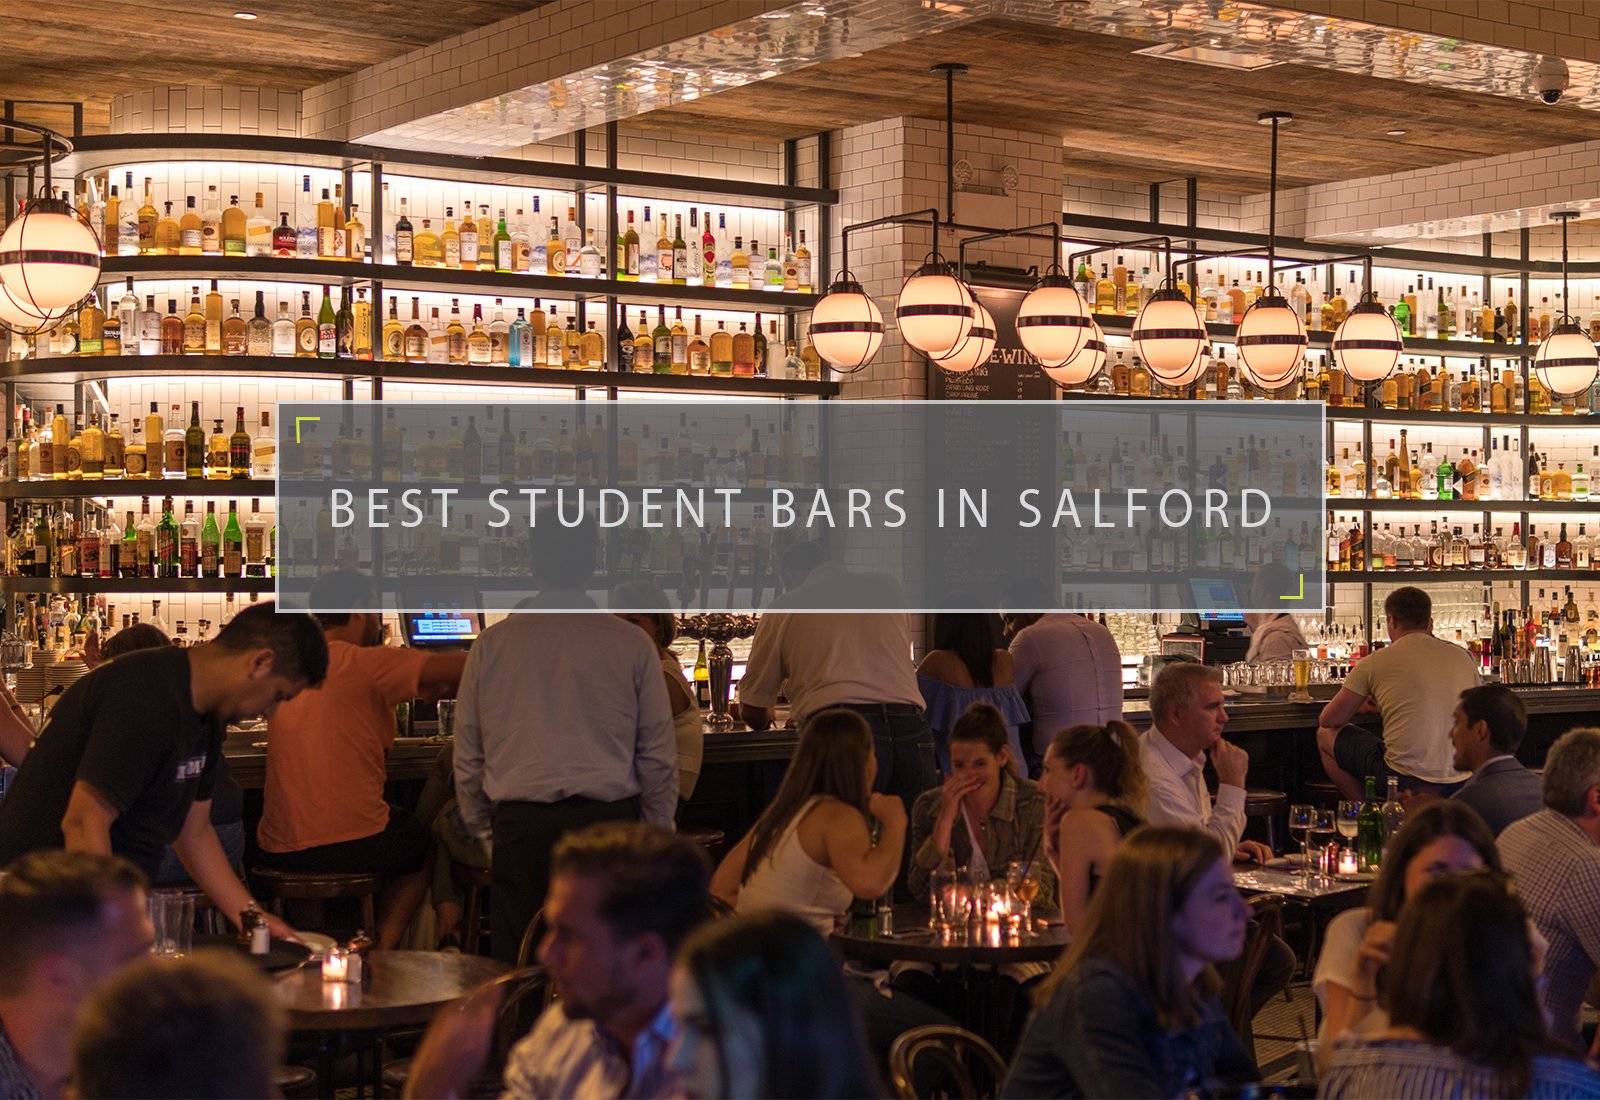 BEST STUDENT BARS IN SALFORD